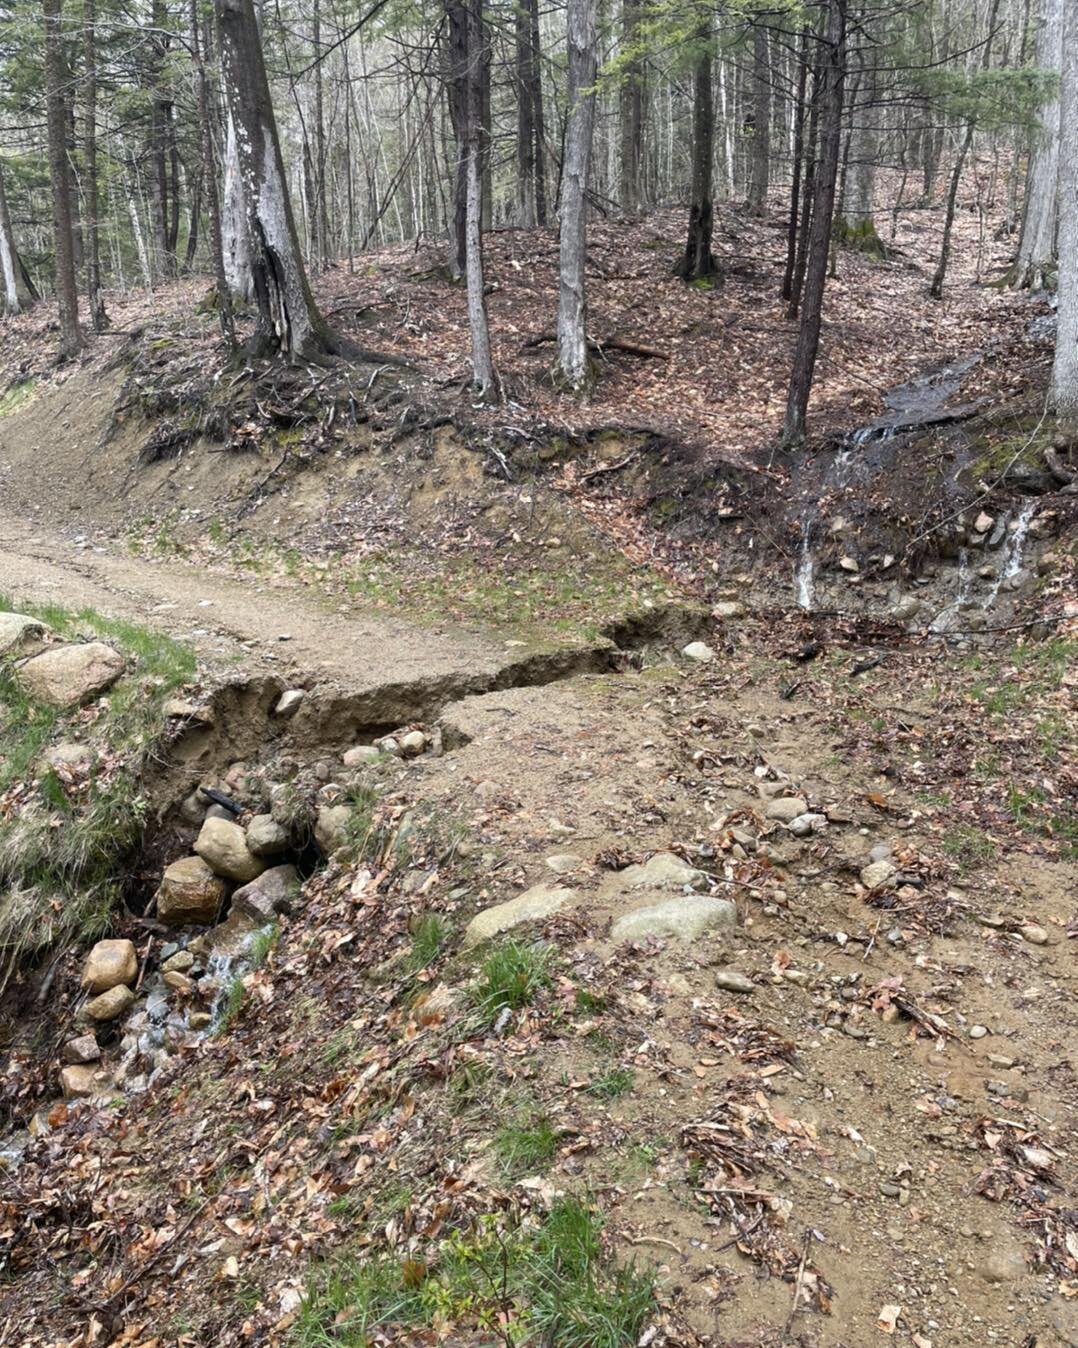 Trail Workday Update

To get the Hurricane network rideable we are going to need a multiple volunteer trail days. Storm damage on every trail with some sections of trail showing extensive erosion. Tulip Trails will be repairing certain sections with 